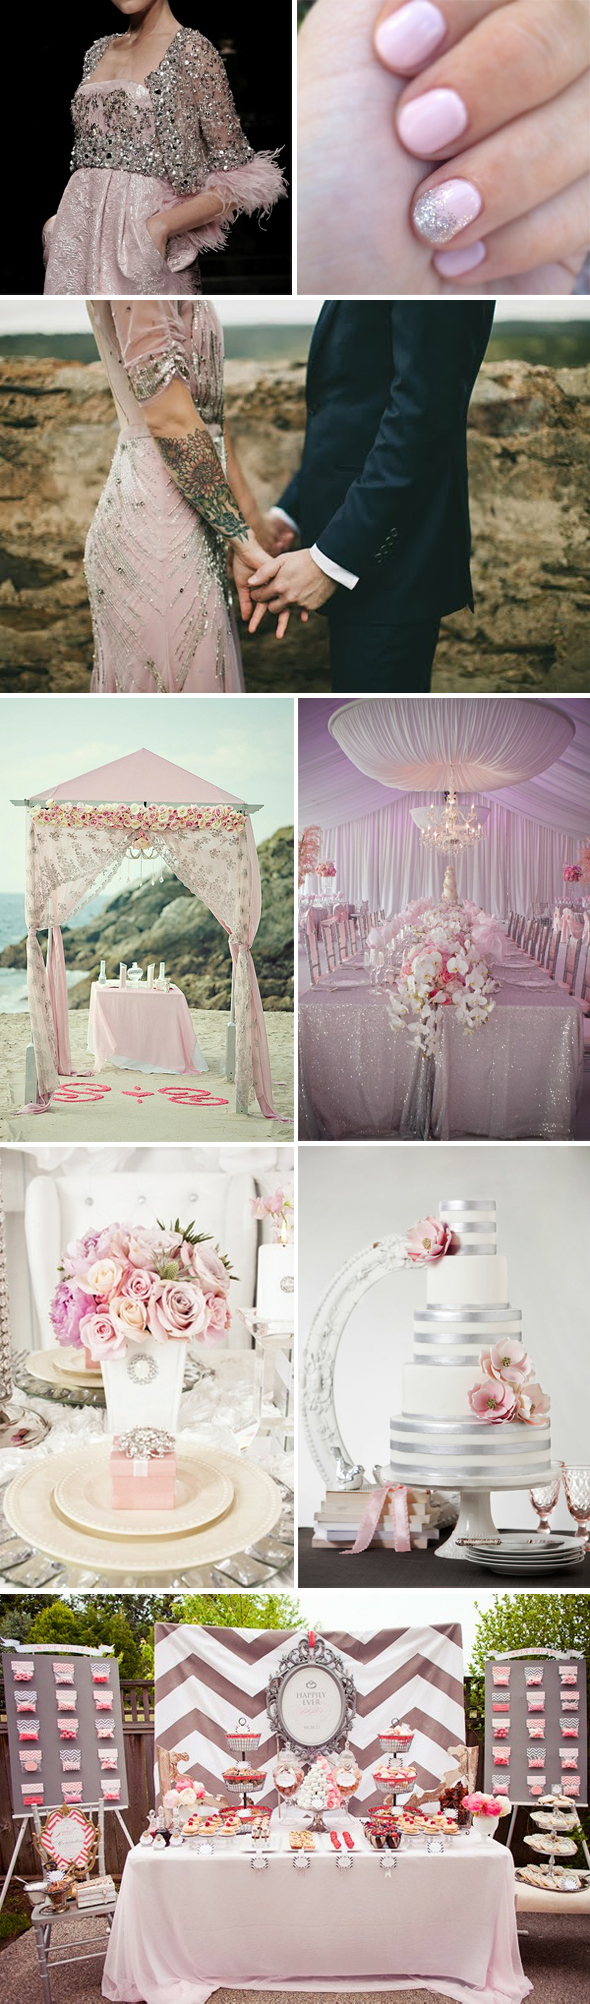 pink and silver wedding